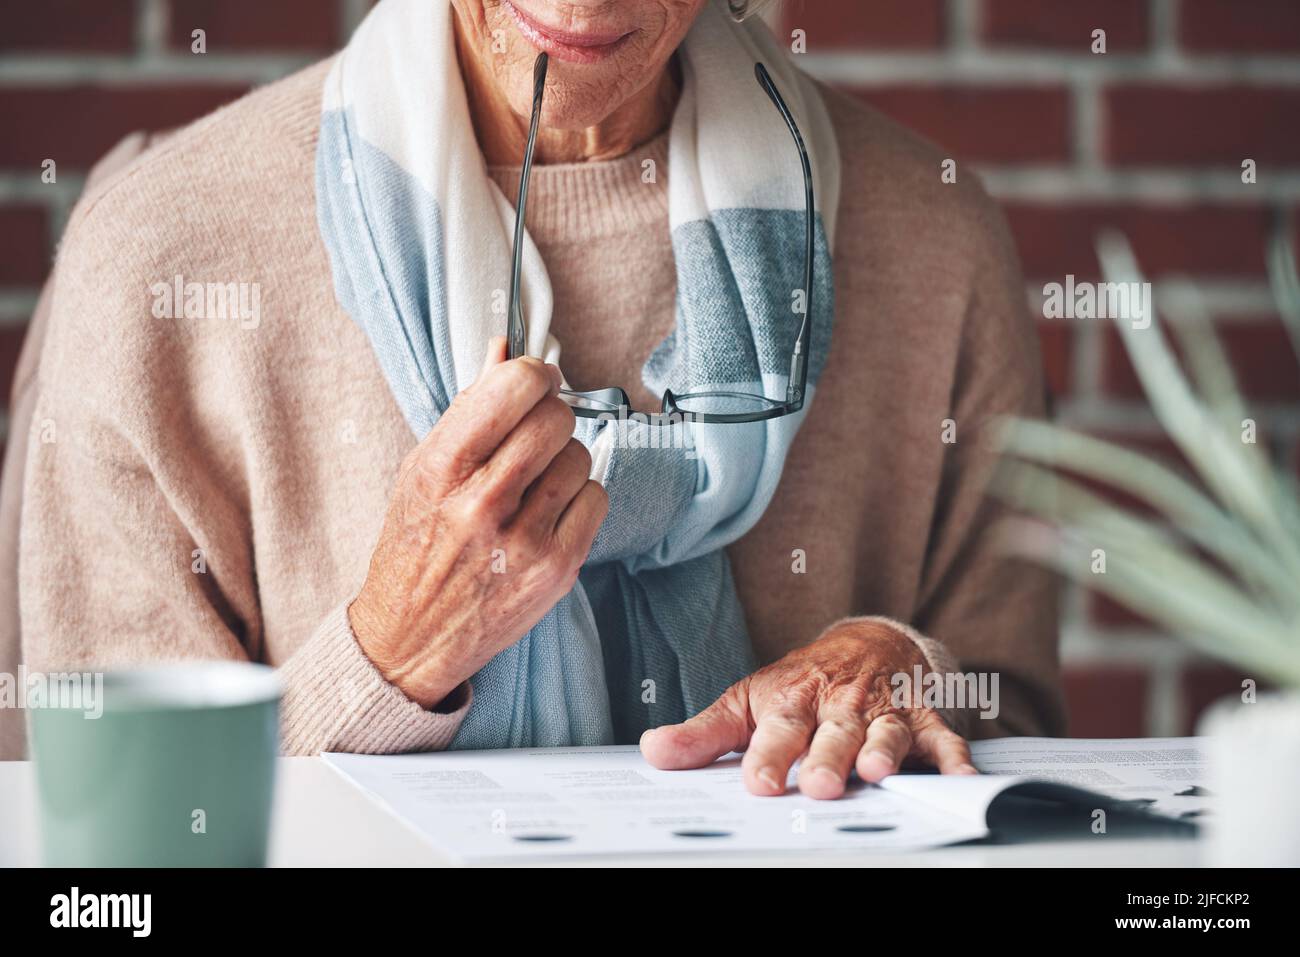 Mature woman reading financial insurance documents at home.A senior woman reading financial paperwork planning her retirement. A mature woman holding Stock Photo